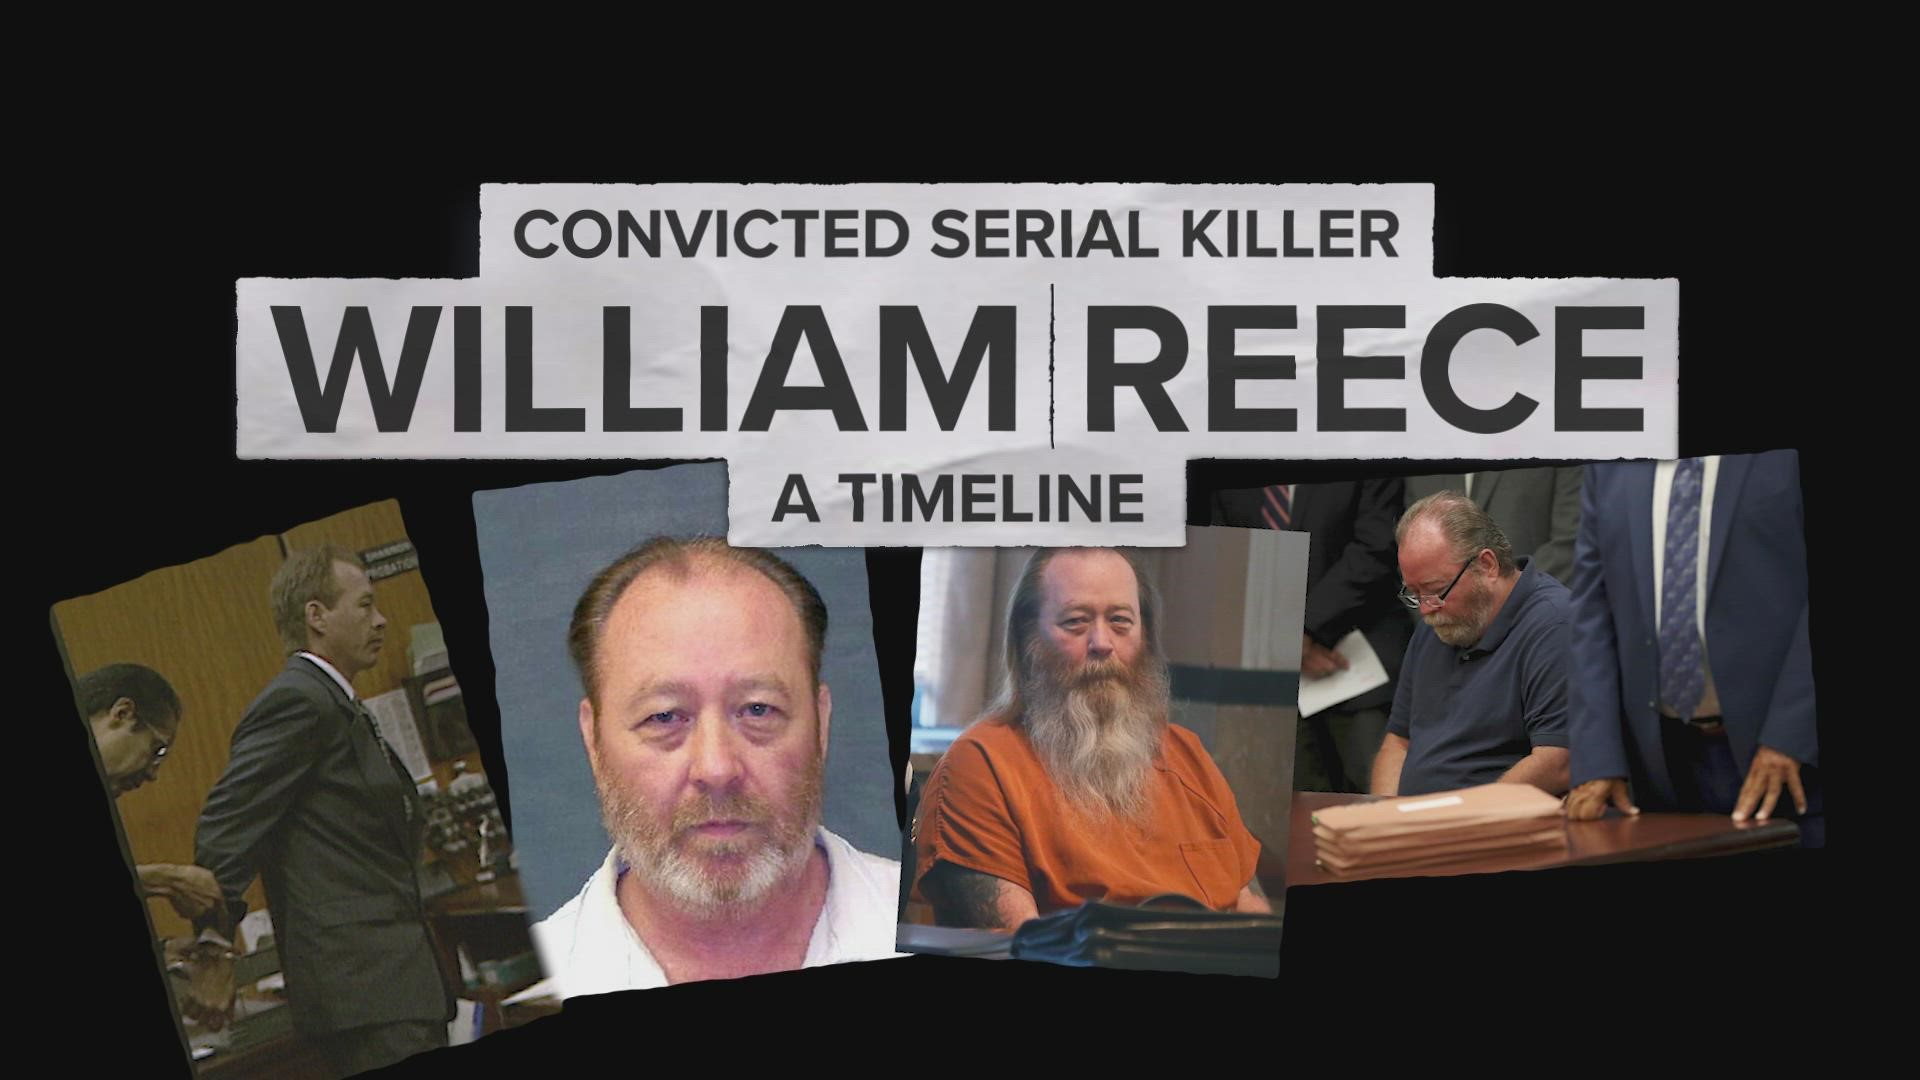 Reece admitted he kidnapped and murdered at least two Houston-area girls and a young North Texas woman back in the 90s.